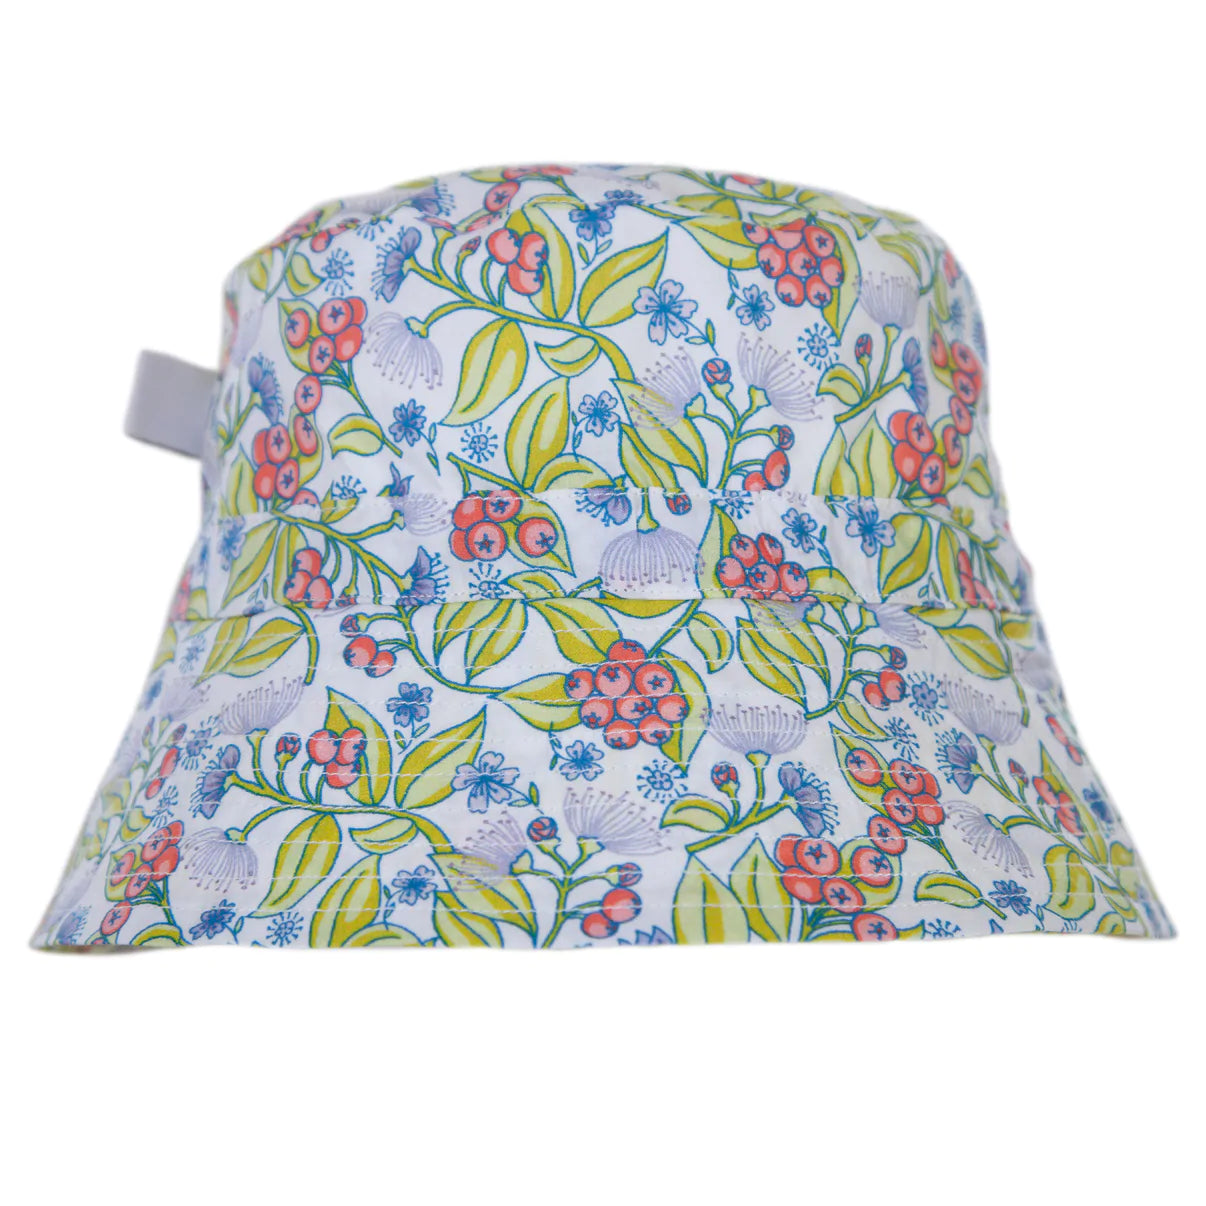 Melissa Hat - Lilly Pilly Hat Peggy 